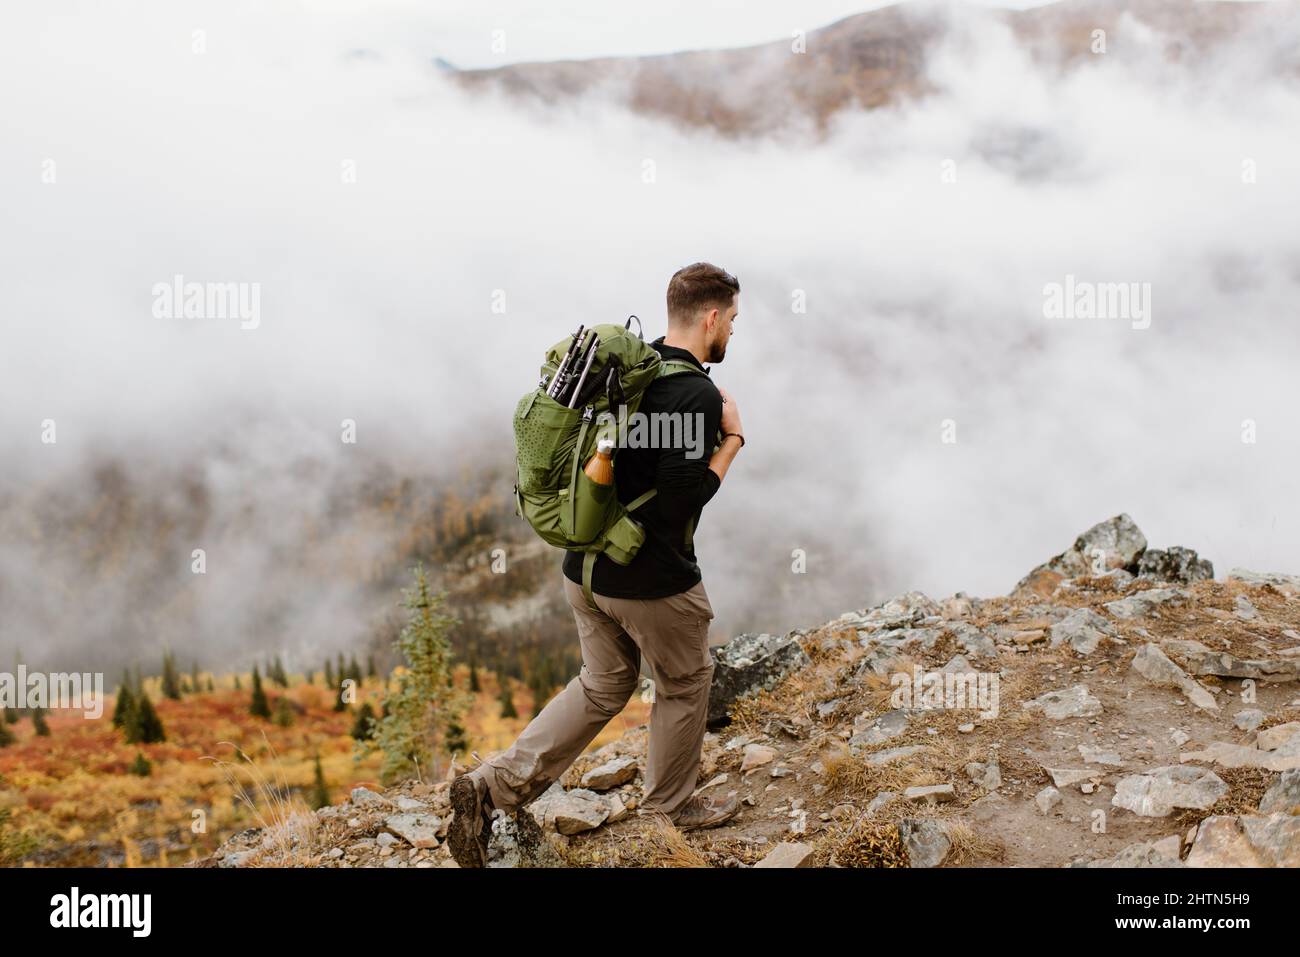 Canada, Whitehorse, Man with backpack hiking in rocky landscape Stock Photo  - Alamy